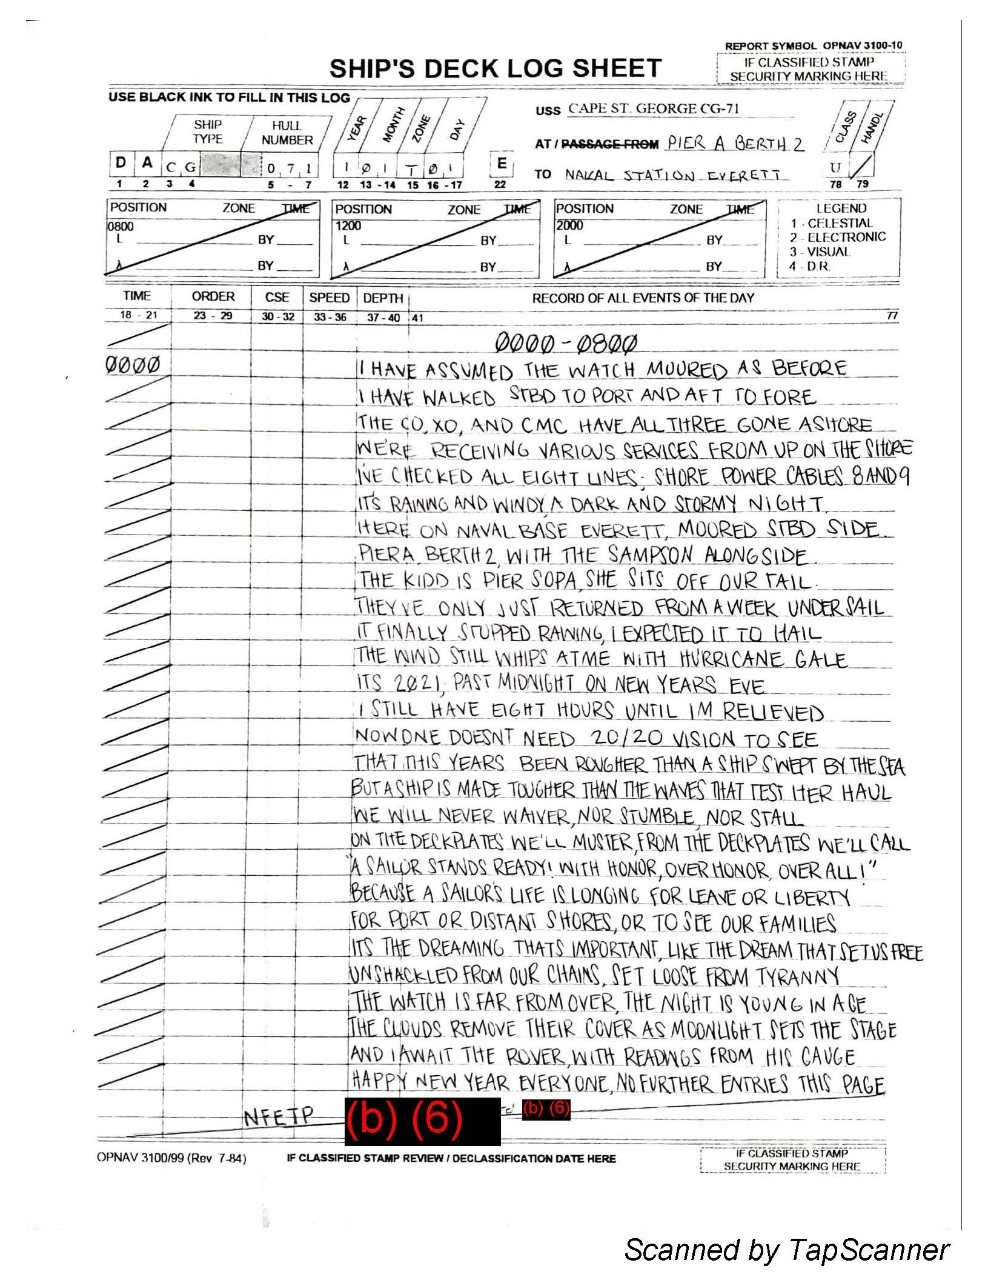 USS CAPE ST. GEORGE (CG-71) 2021 New Years Deck Log Entry